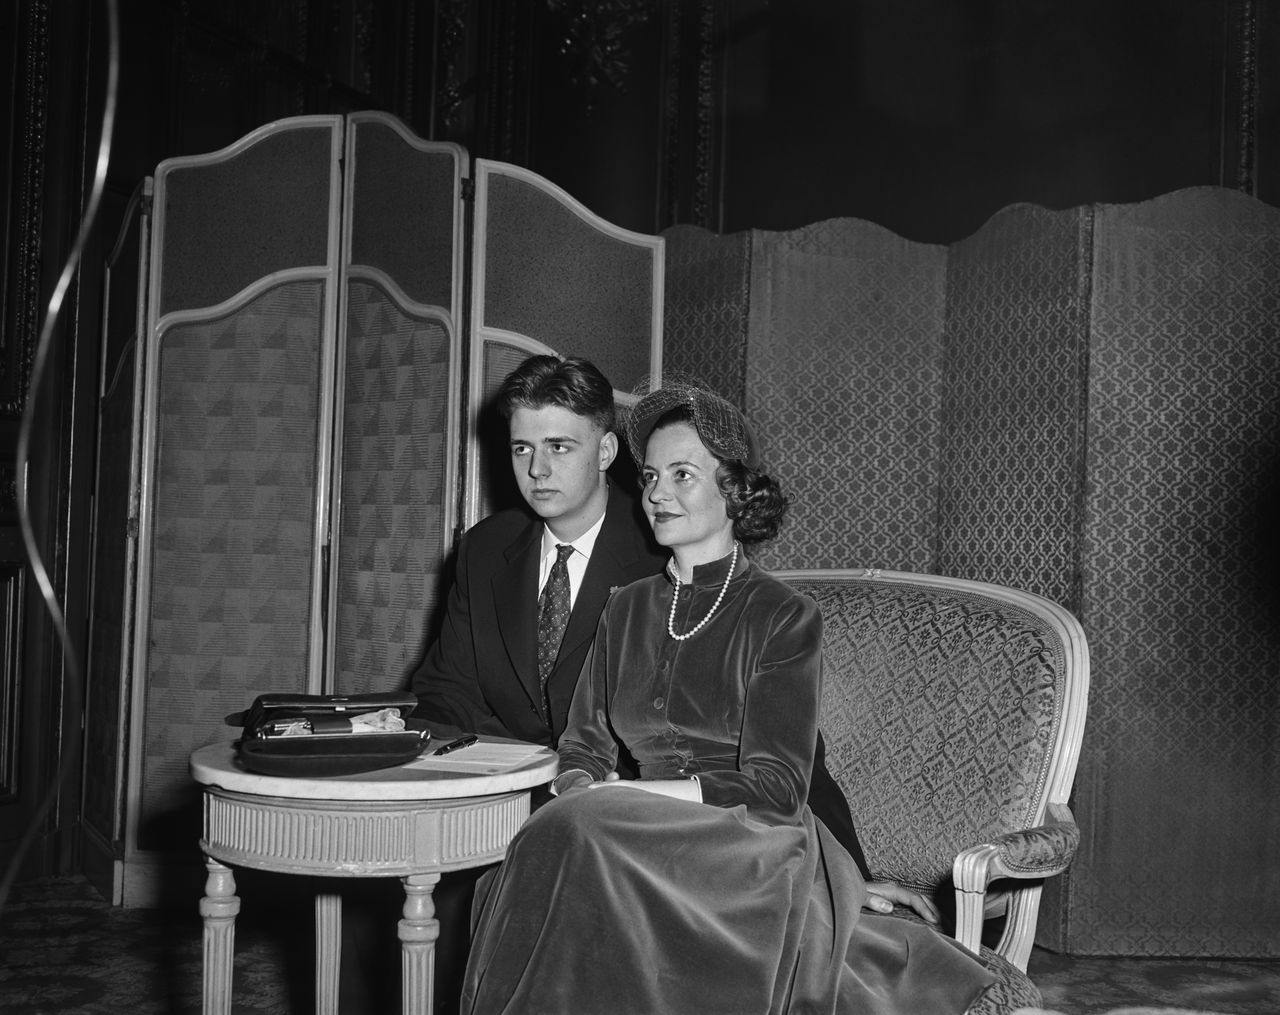 Albanian Royal Leka, Crown Prince of Albania, wearing a dark suit over a shirt and tie, and his mother, Queen Geraldine of Albania, who wears a velvet dress, a hat with the veil up, and a pearl necklace, sitting at a table with screens in the background, in London, England, 21st January 1957. (Photo by Evening Standard/Hulton Archive/Getty Images)